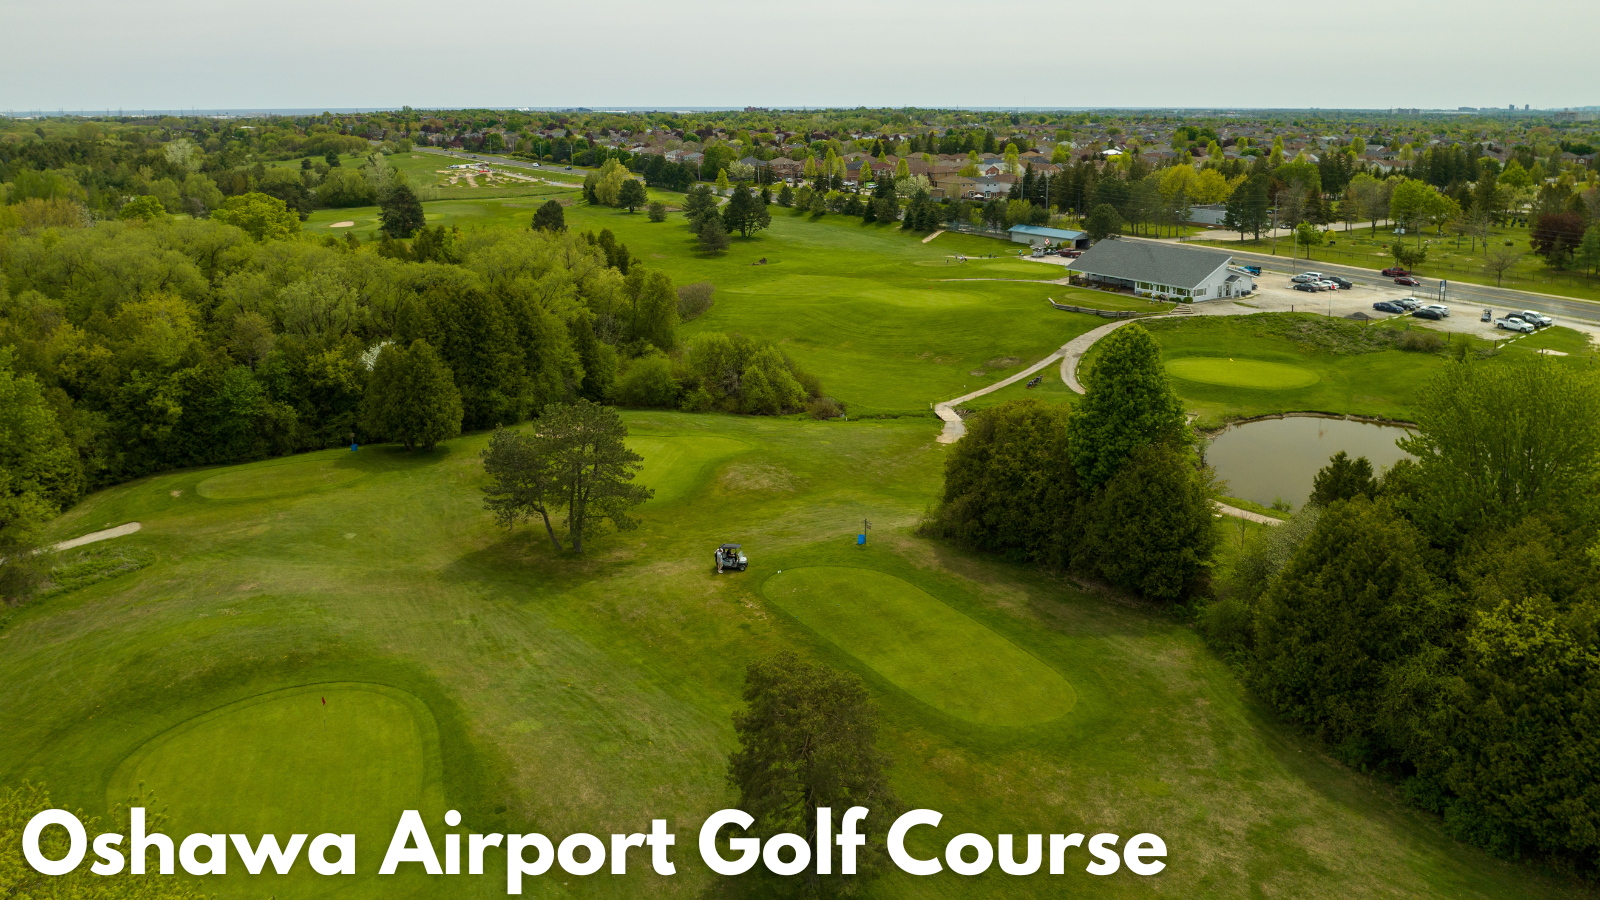 a golf course with text in white that reads Oshawa Airport Golf Course below